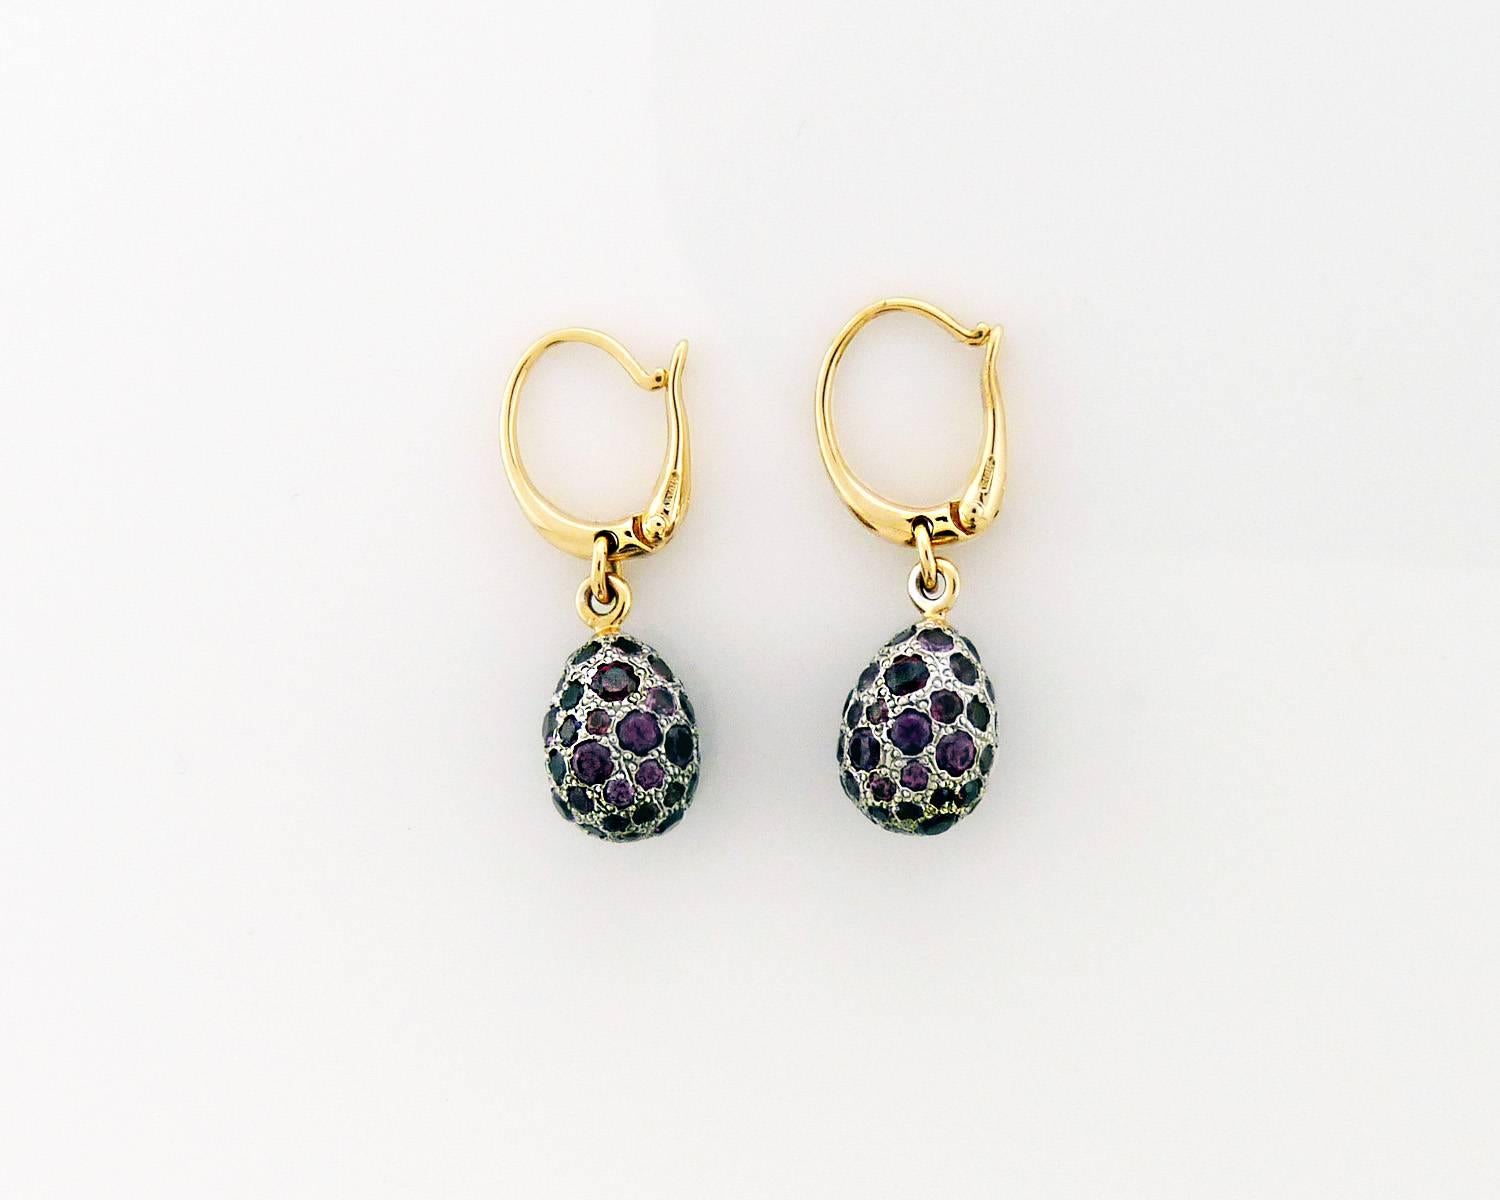 This authentic pair of earrings are by Pomellato, they are crafted from solid 18k in white and yellow gold with a paved finish featuring hook backs with a dangling fruit like shape amethyst. It is signed by the designer with the metal